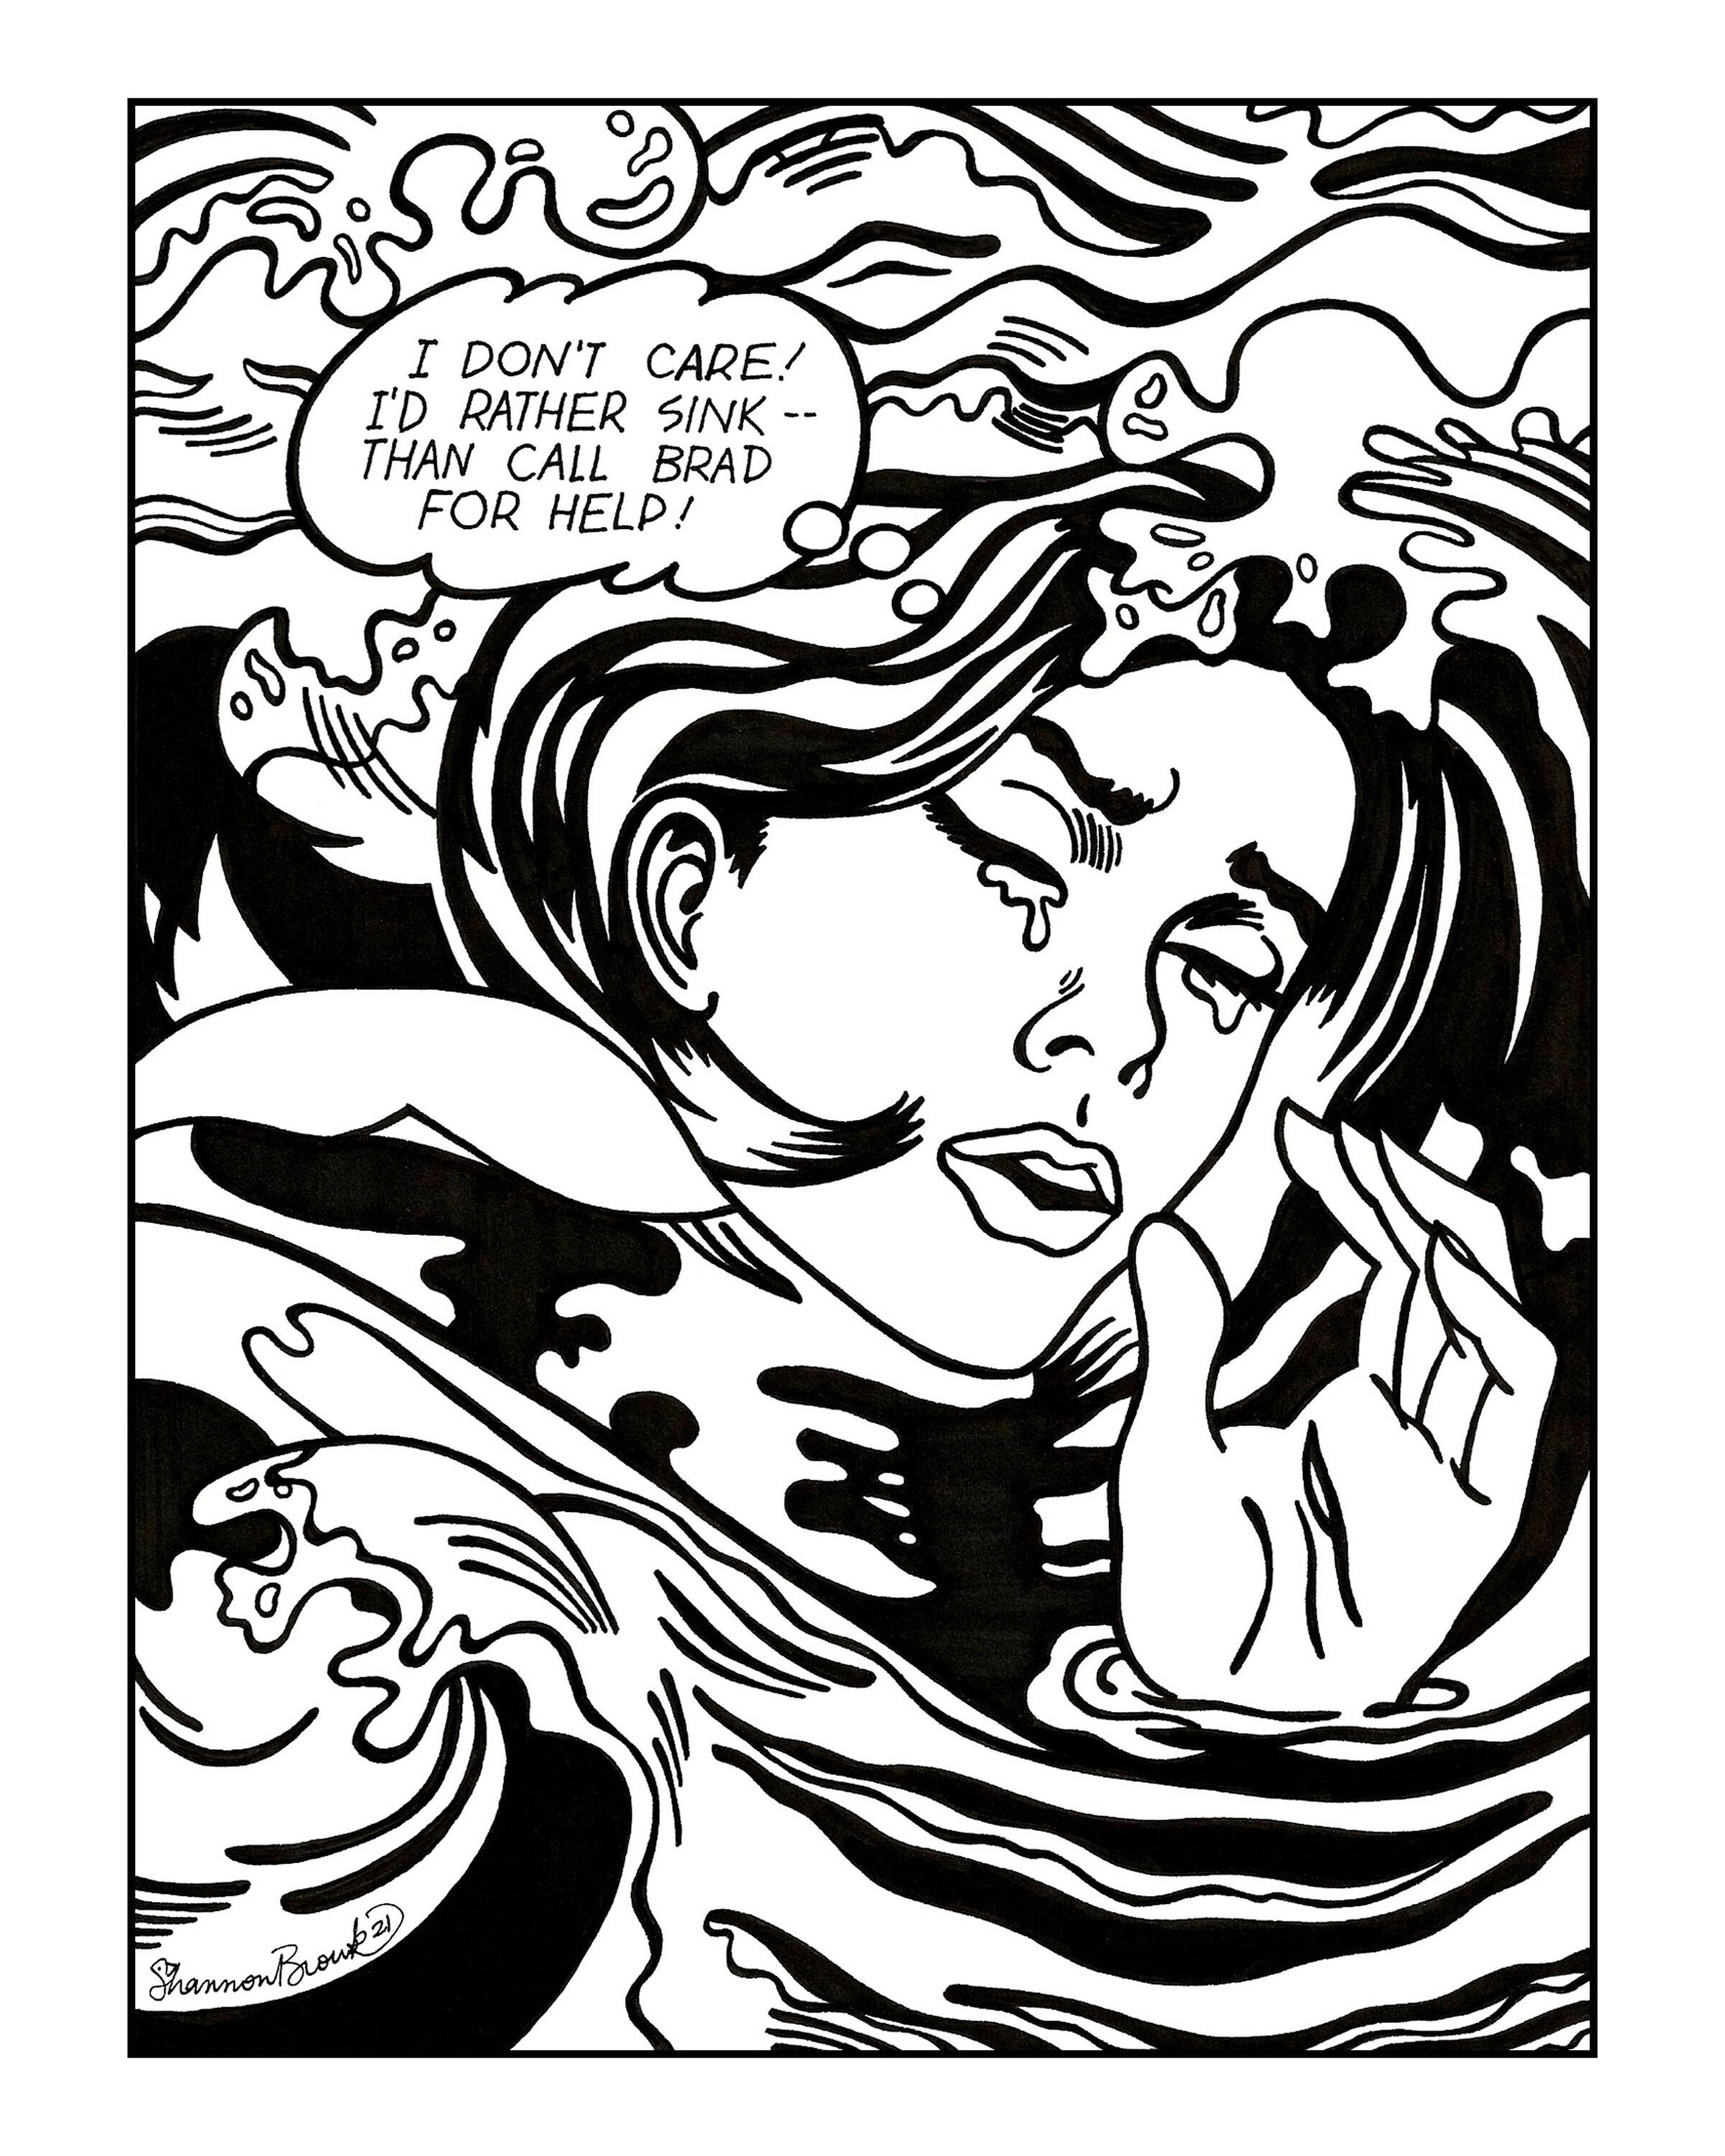 Drowning girl roy lichtenstein pop art famous artist coloring page painting famous artist art history coloring page printable art download now